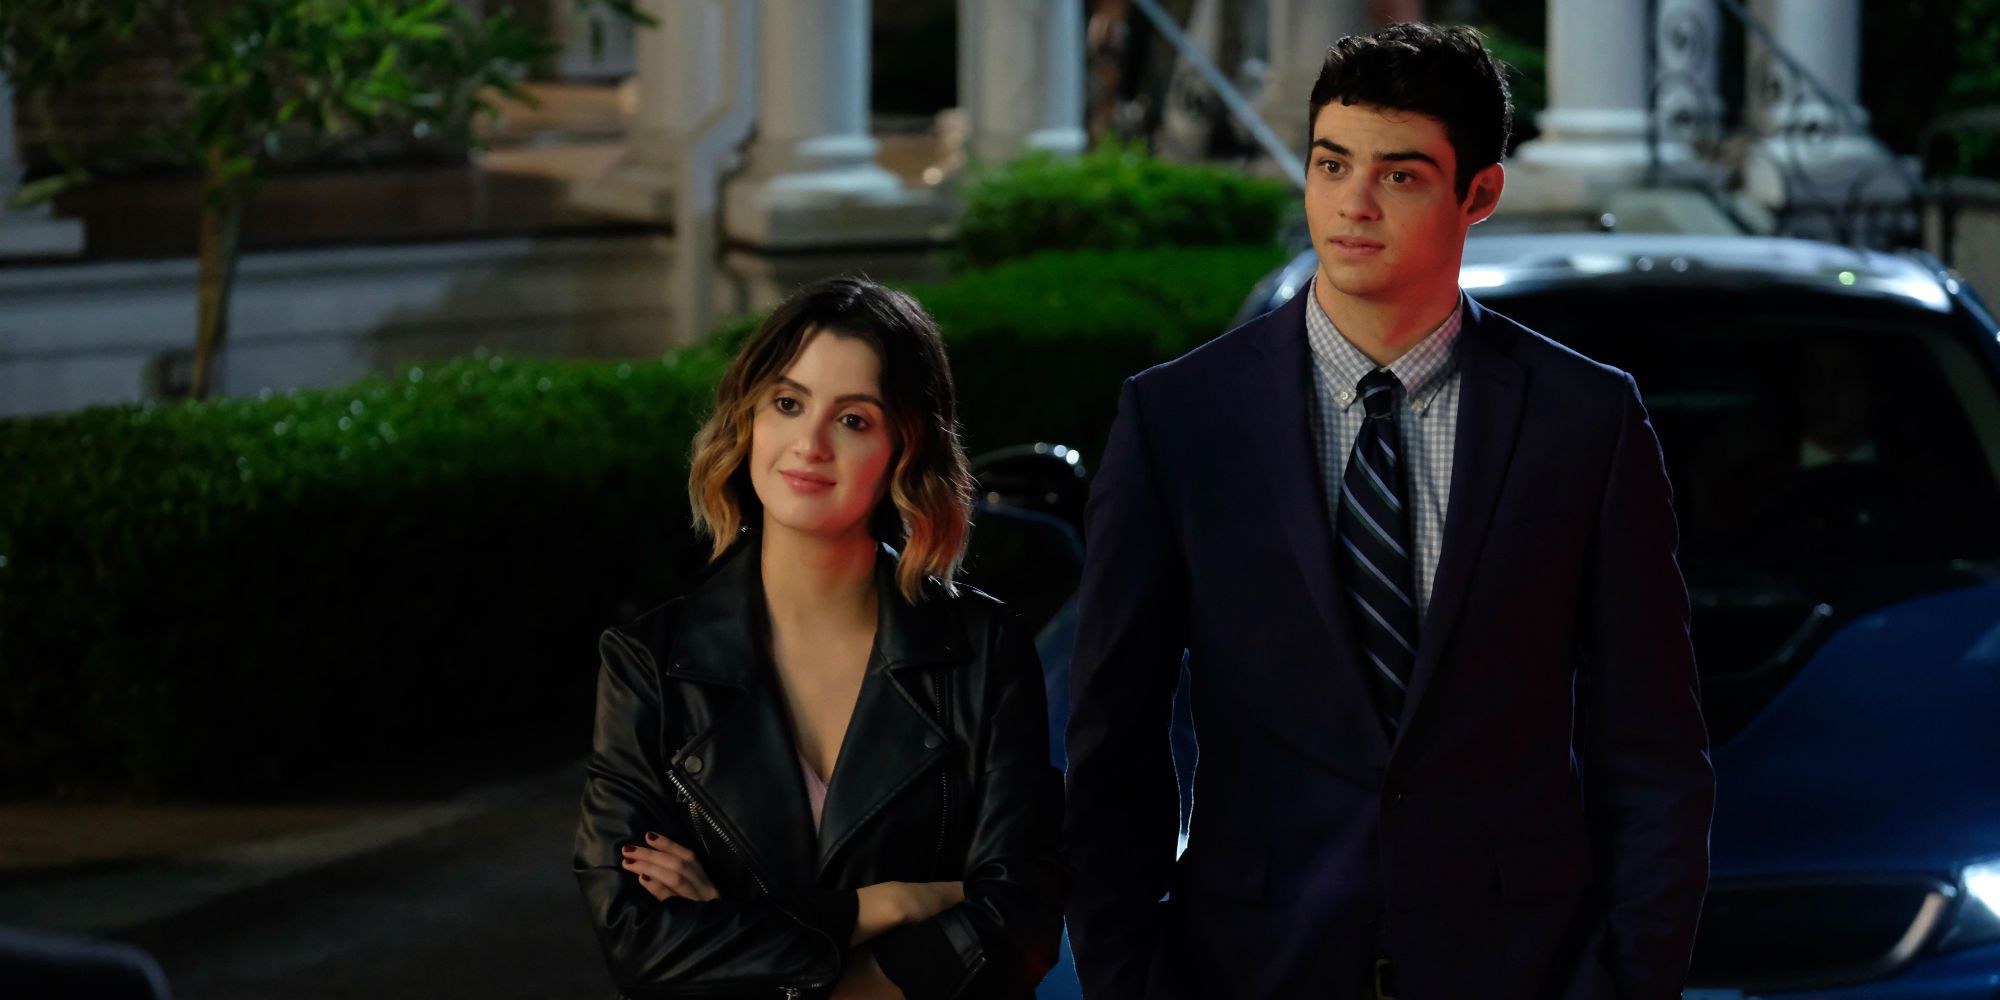 Laura Marano and Noah Centineo standing next to one another with amused expressions in The Perfect Date